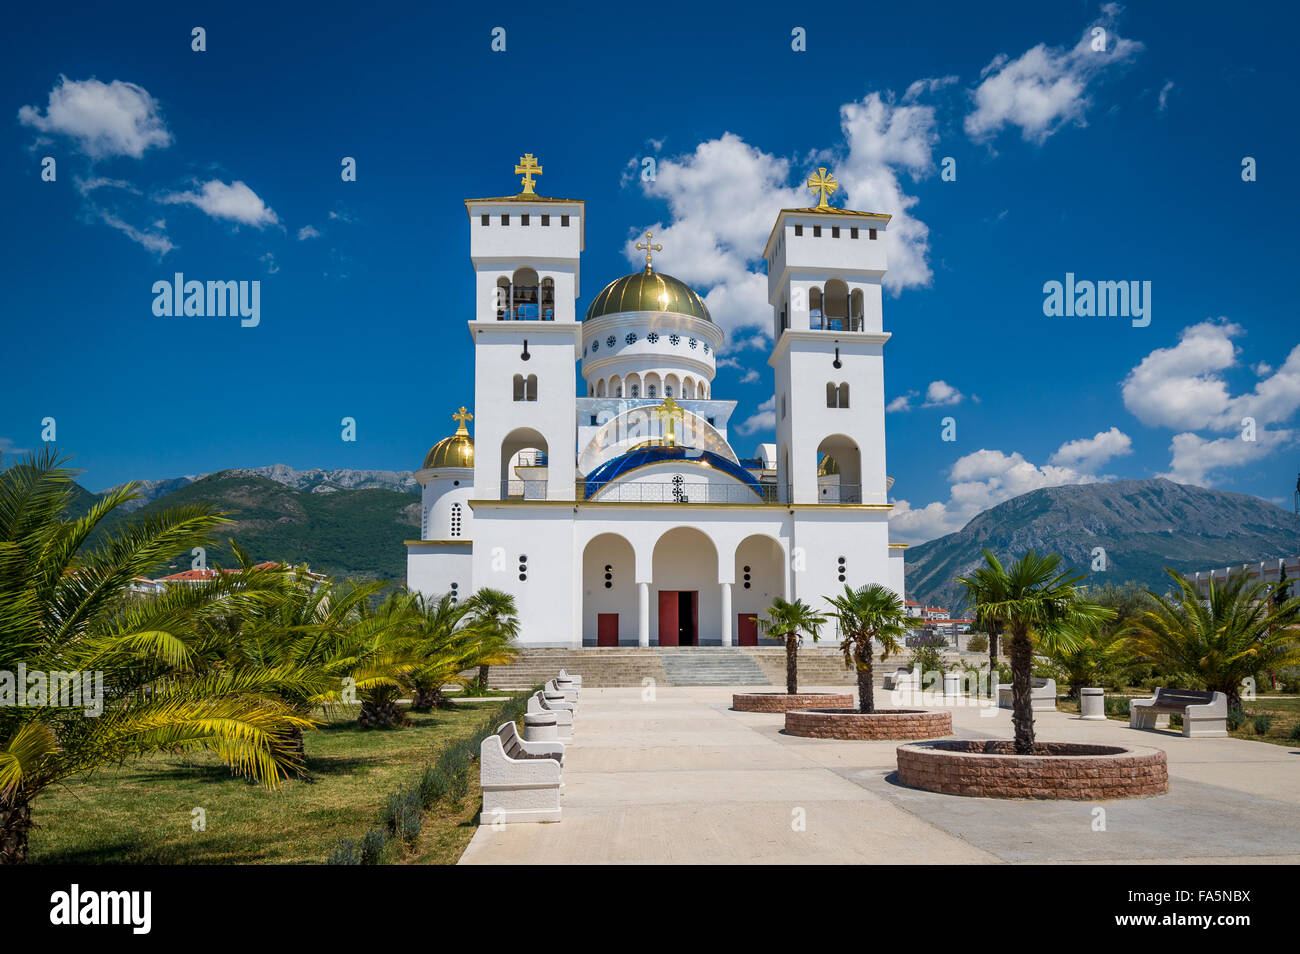 Cathedral of Saint Jovan Vladimir's Temple in Bar. Stock Photo